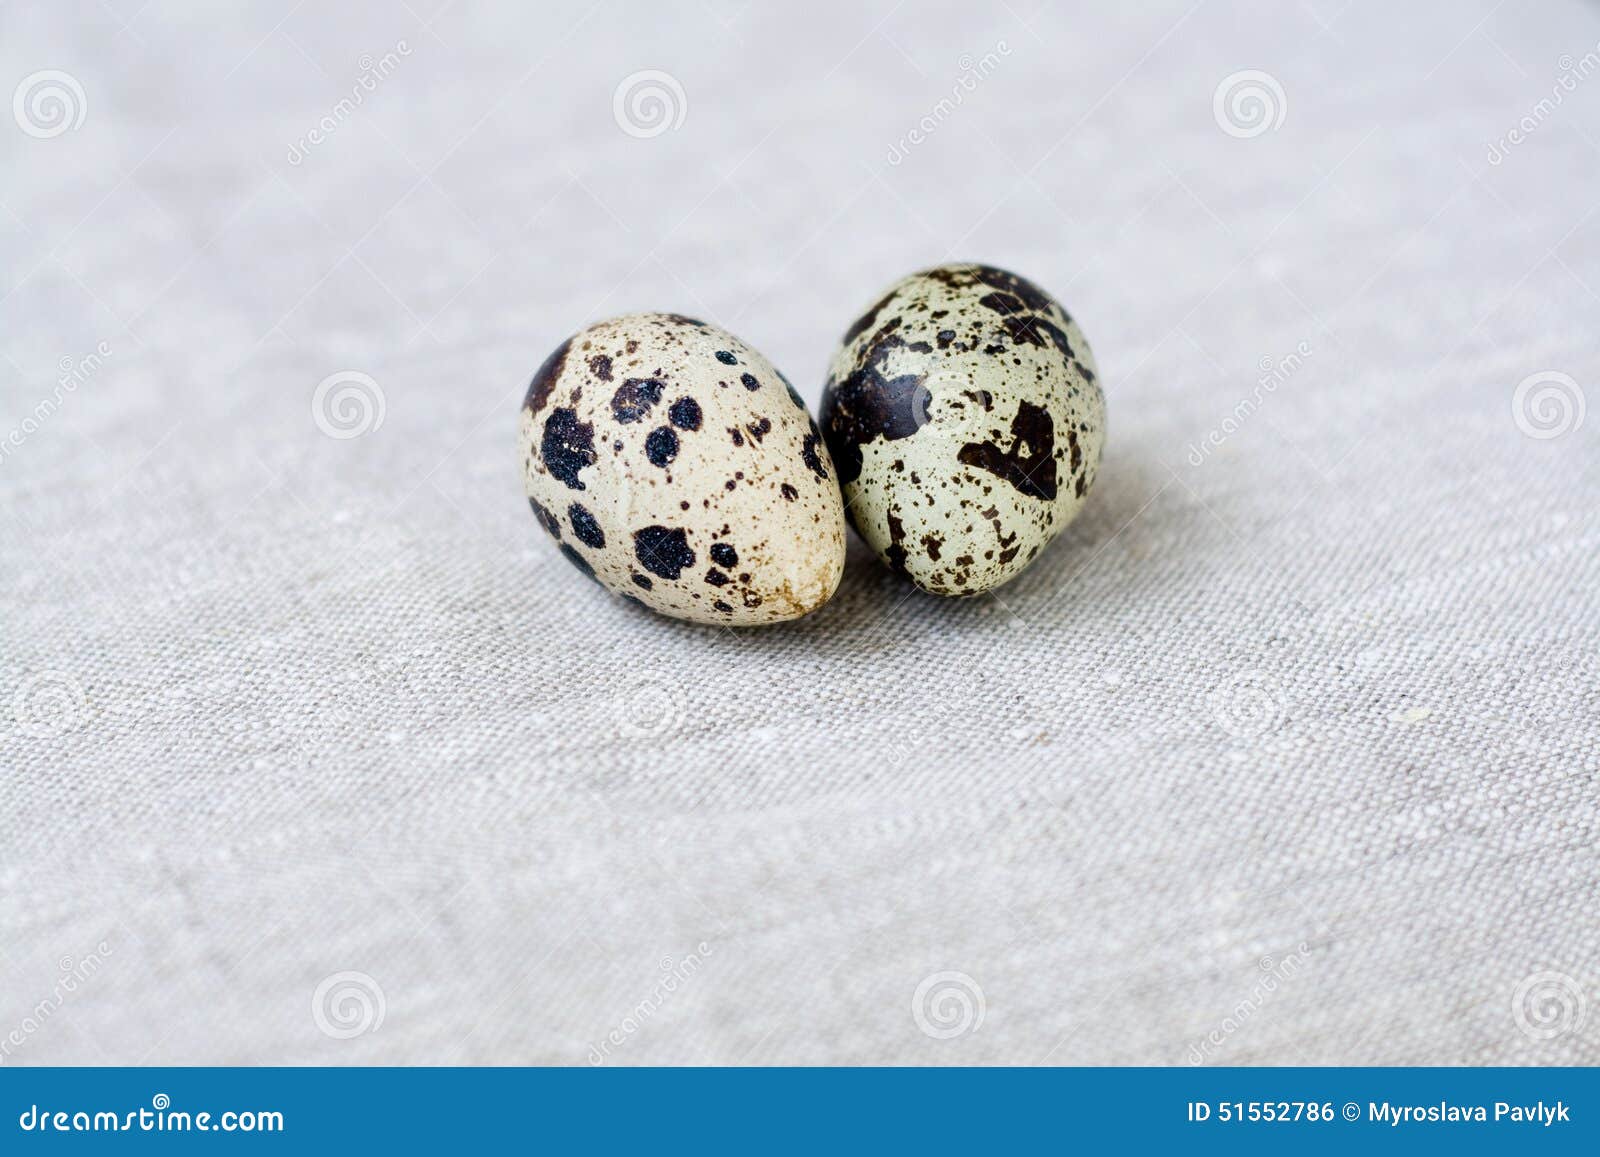 Two quail eggs lying on a light background